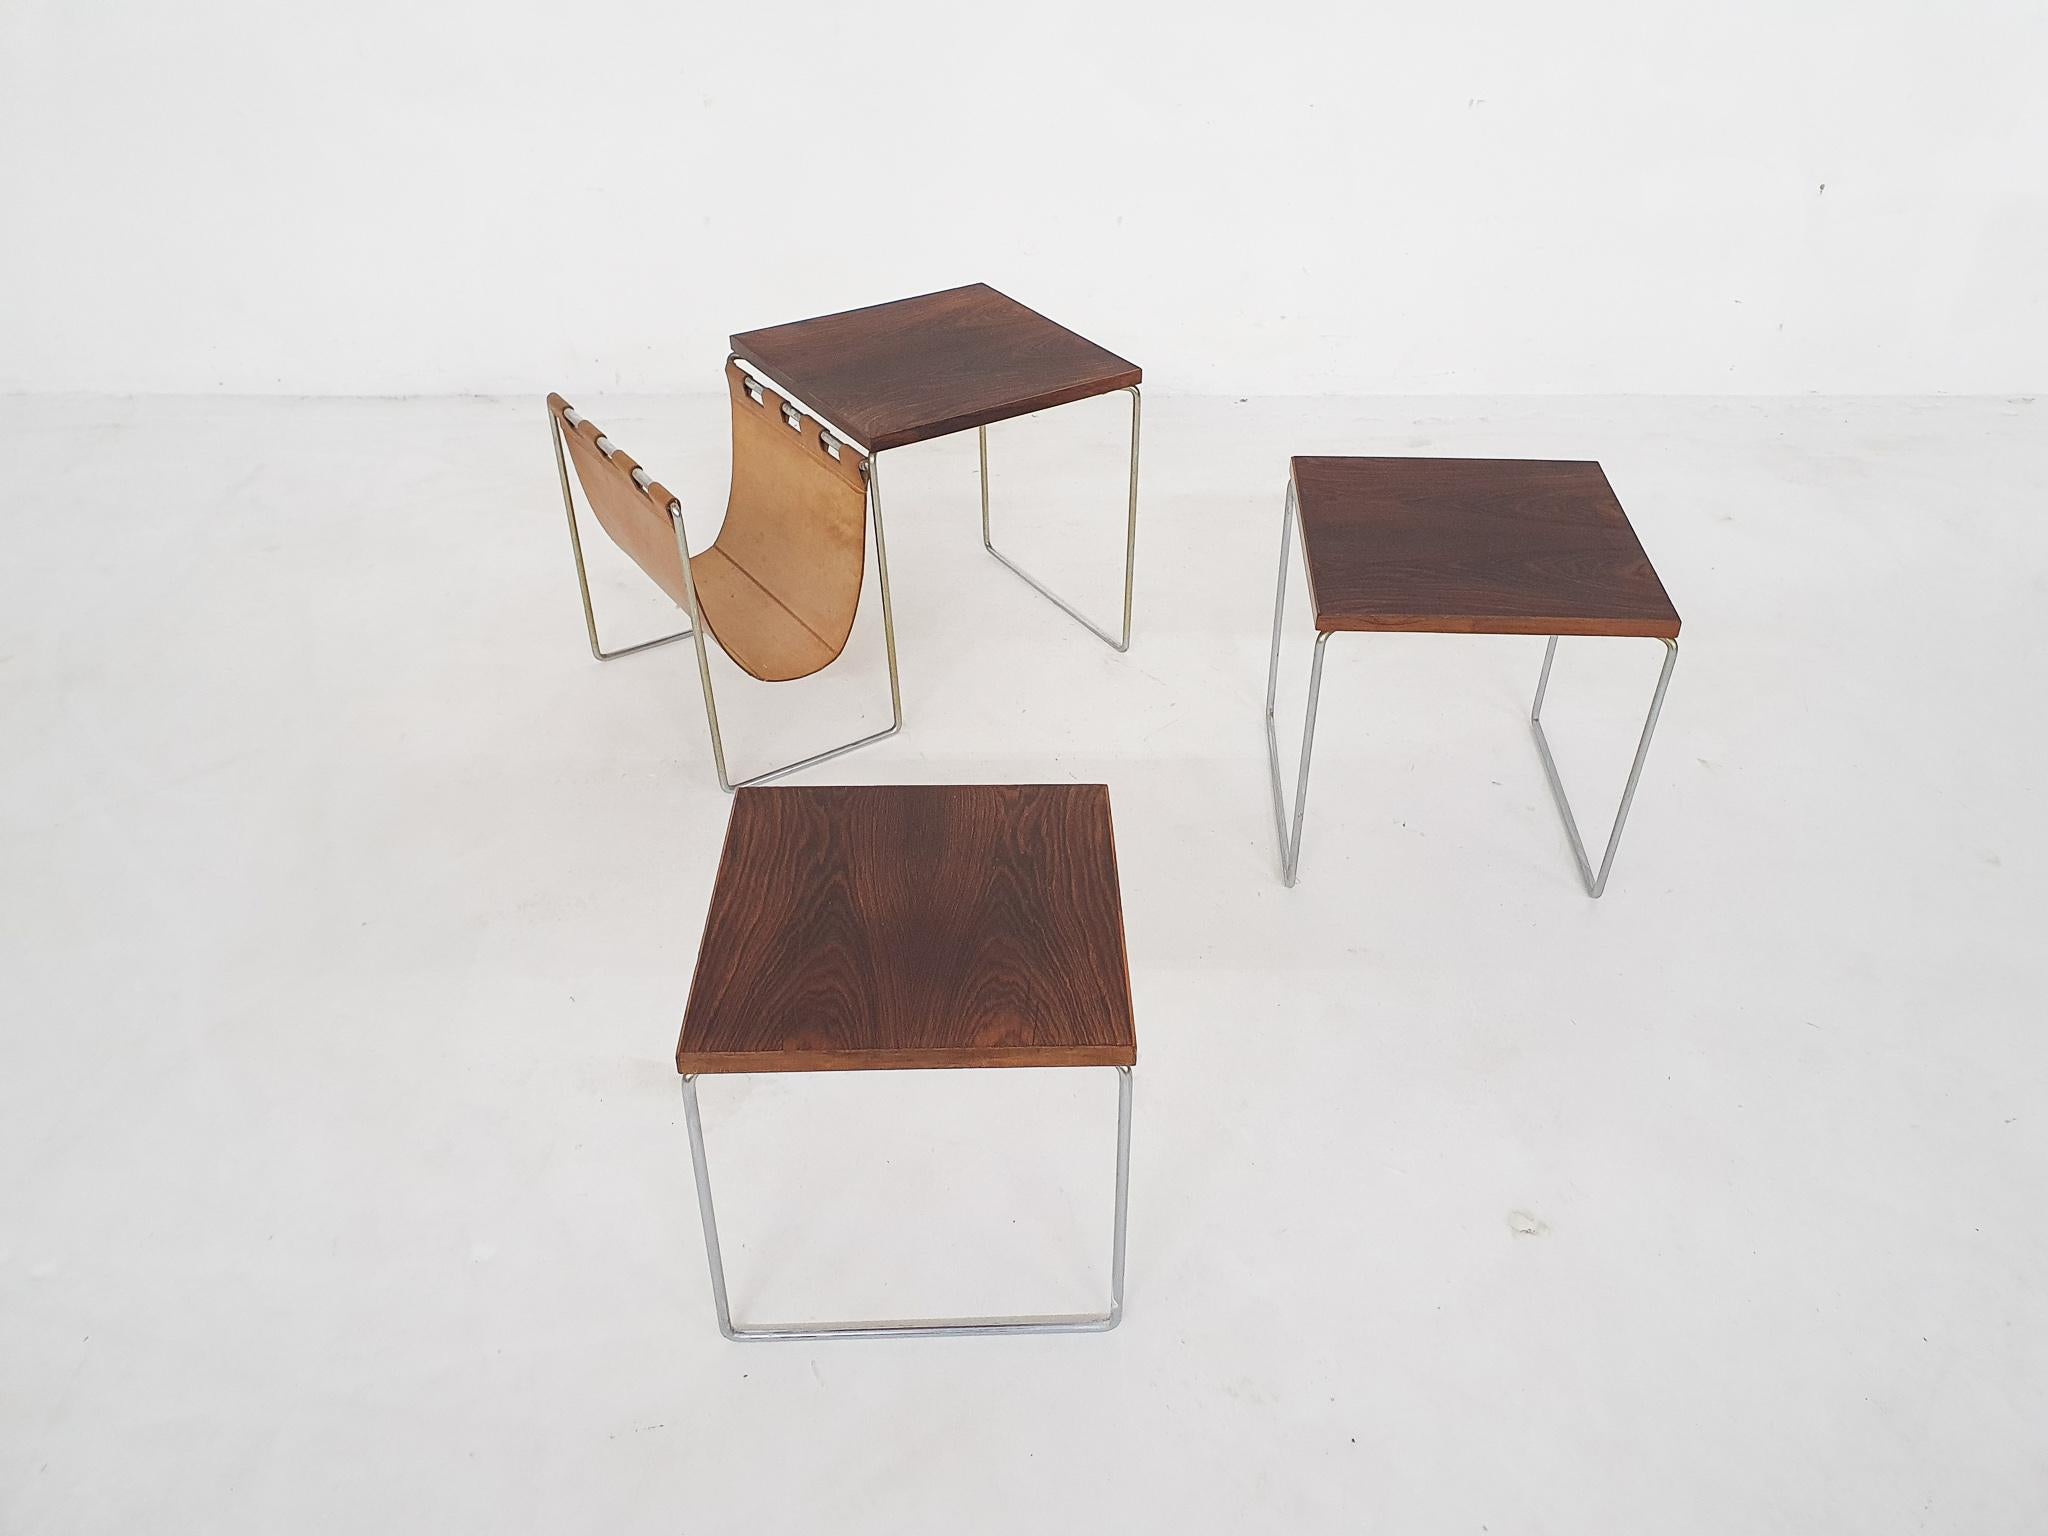 20th Century Mid-Century Wood and Leather Mimiset by Brabantia, the Netherlands 1950's For Sale